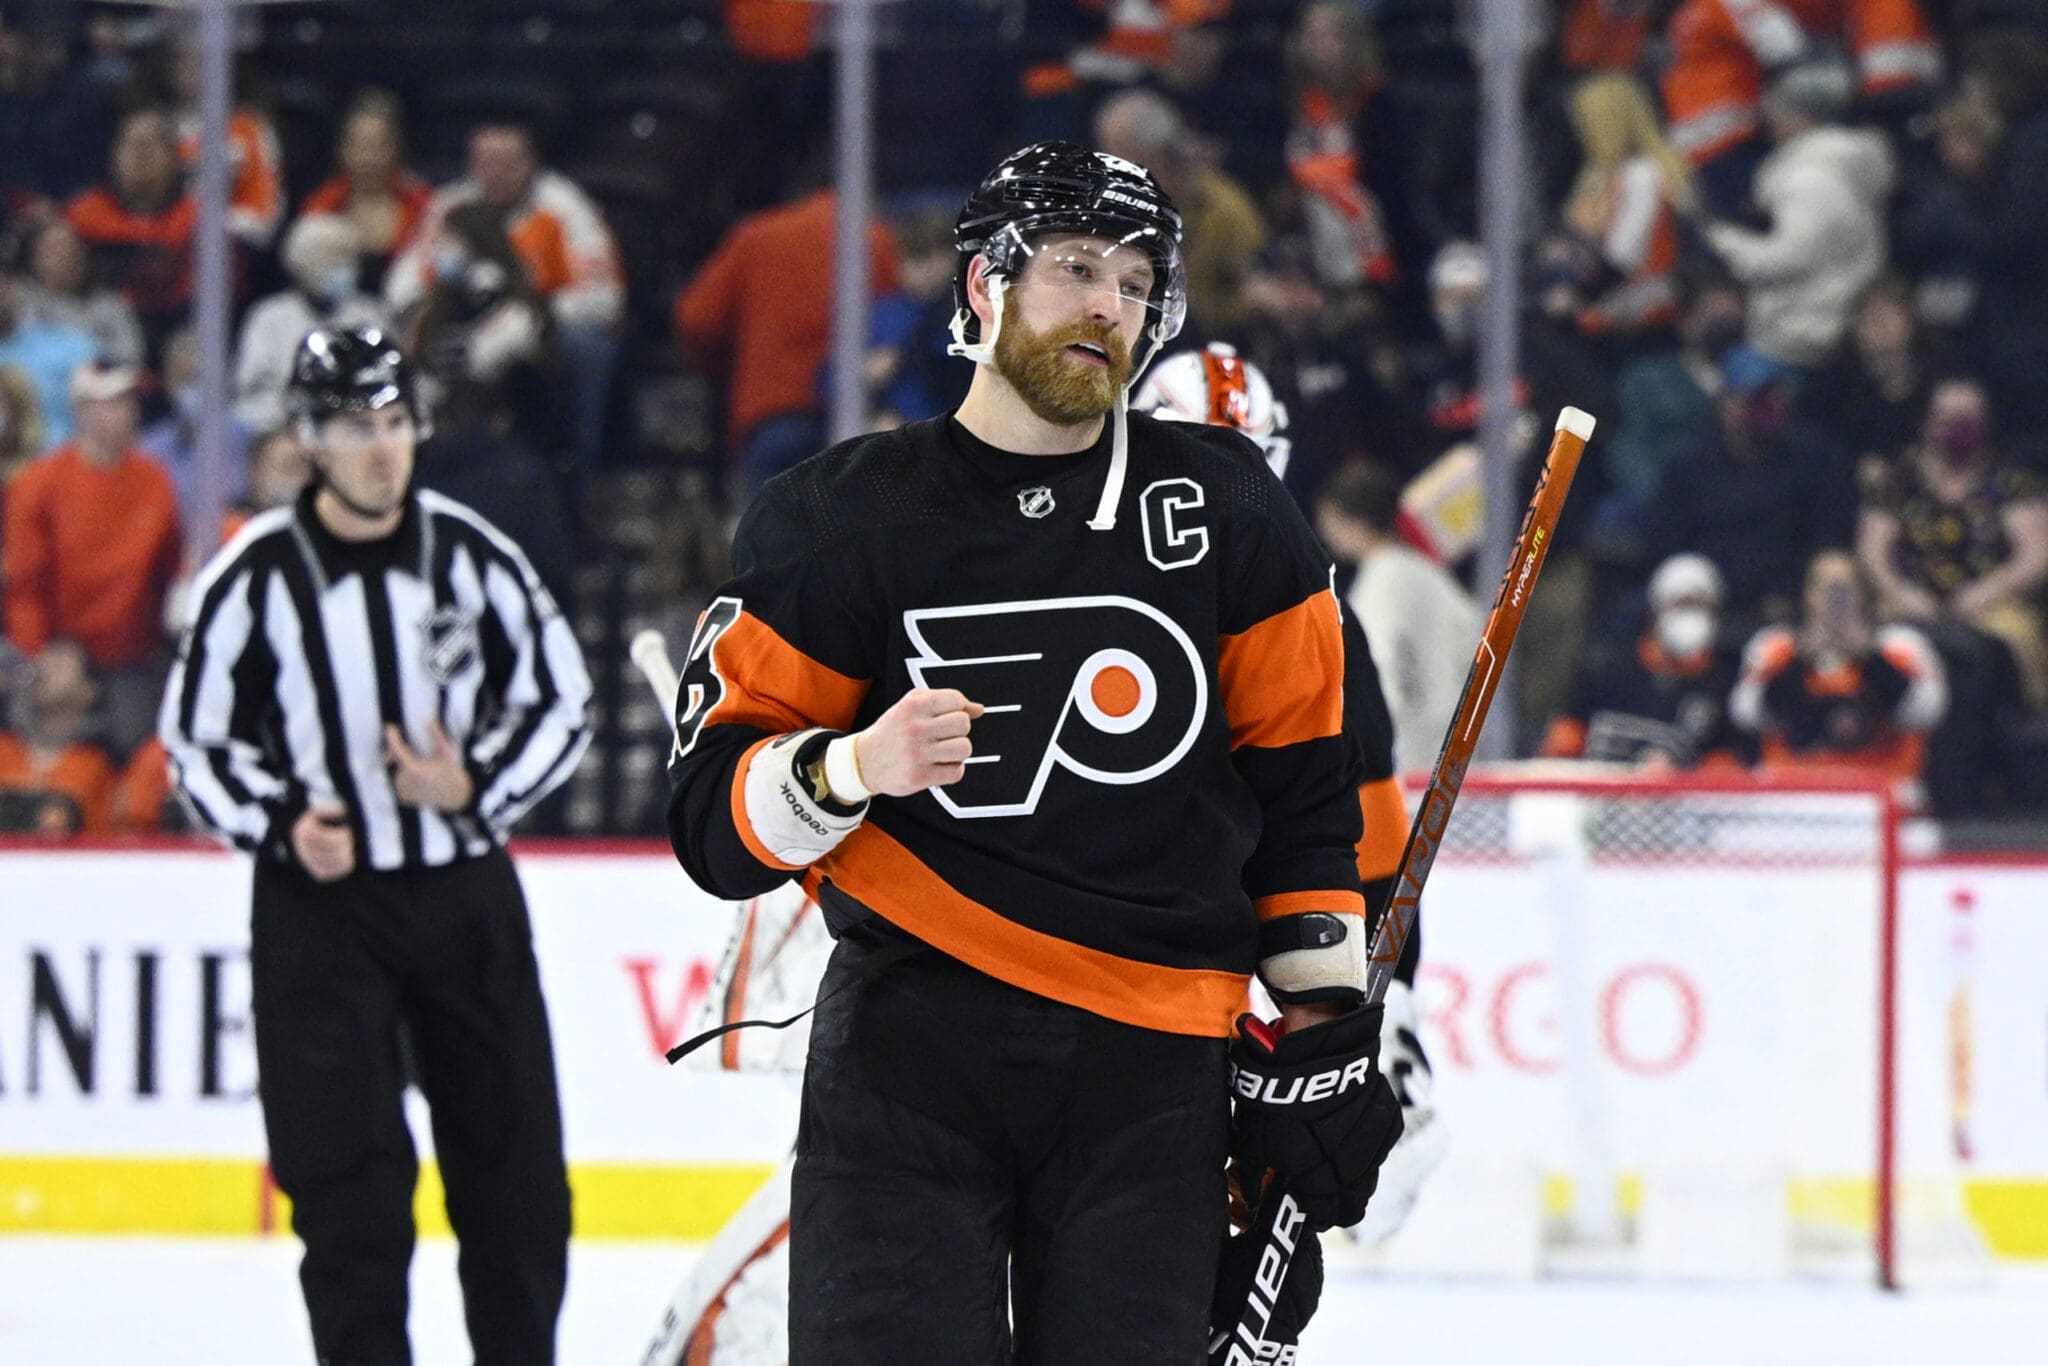 Latest on Claude Giroux: After emotional victory lap, Giroux headed to